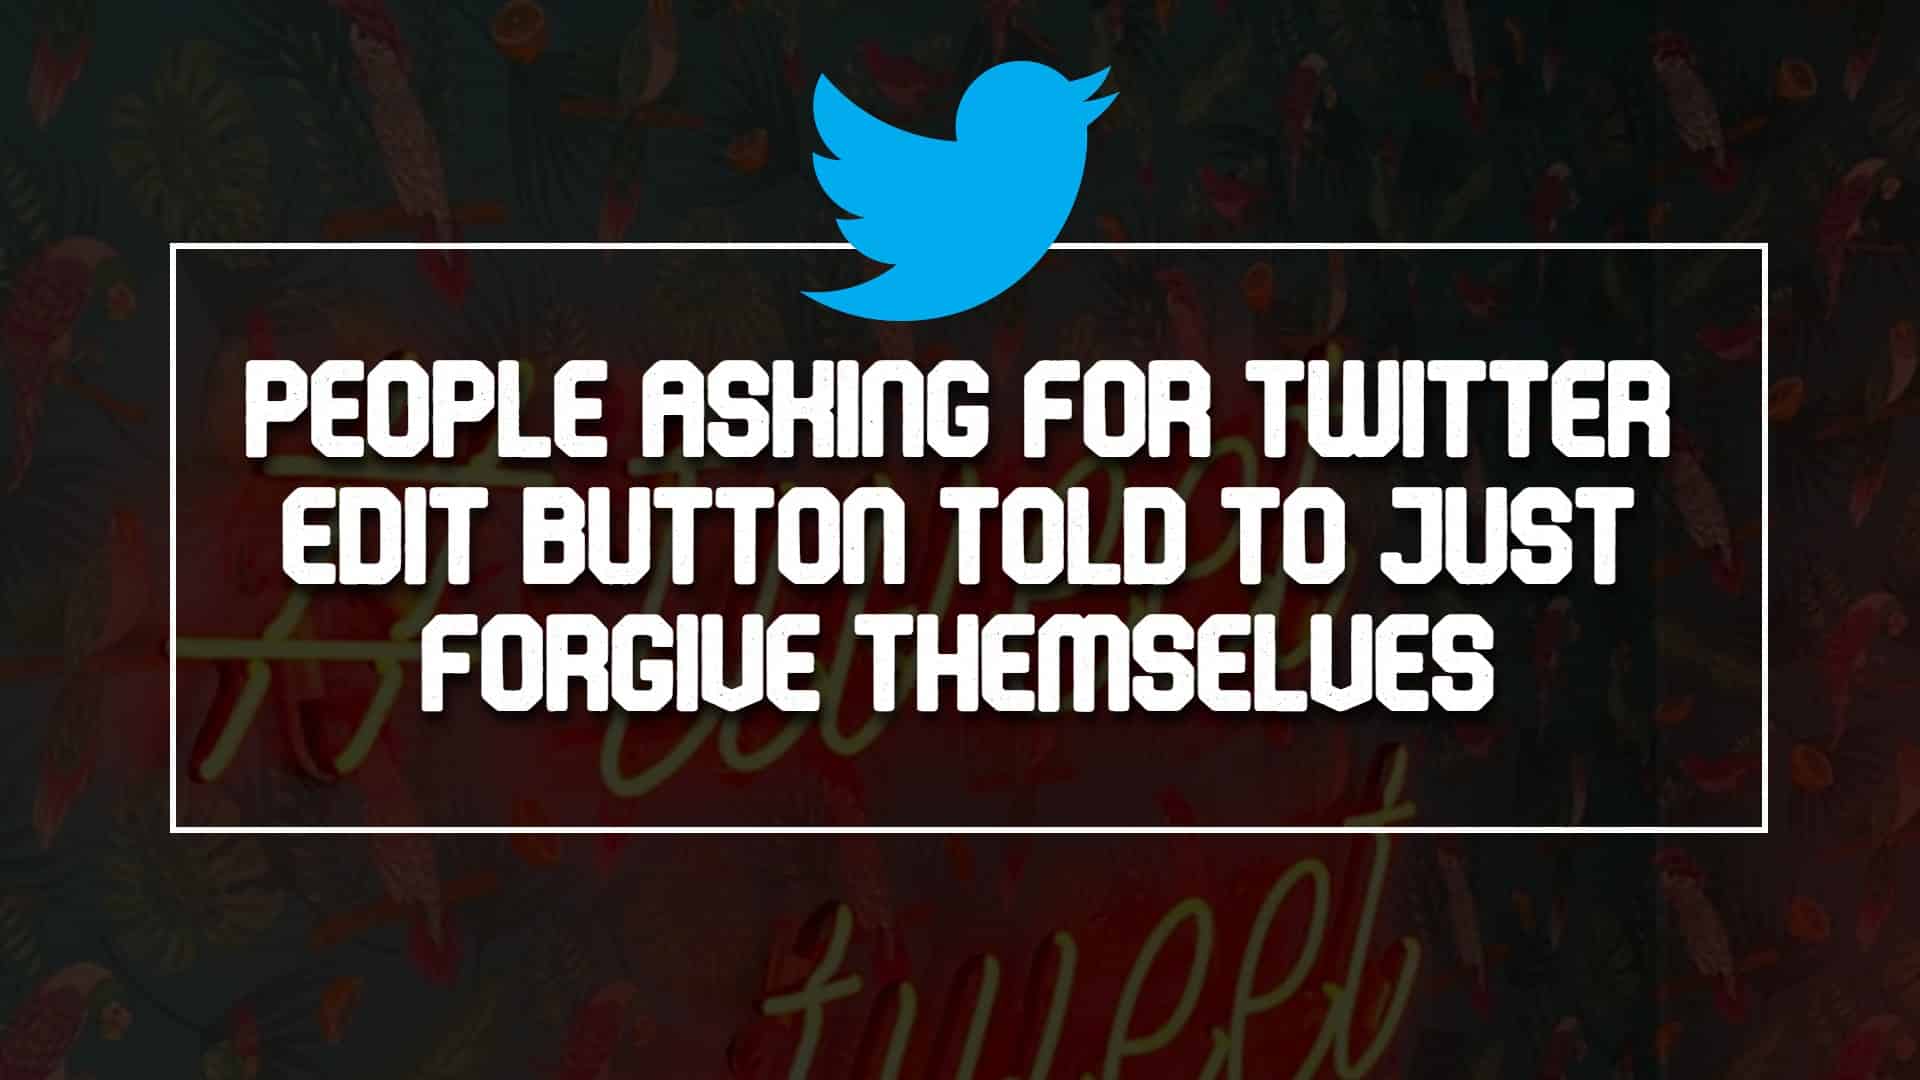 People Asking For Twitter Edit Button Told To Just Forgive Themselves